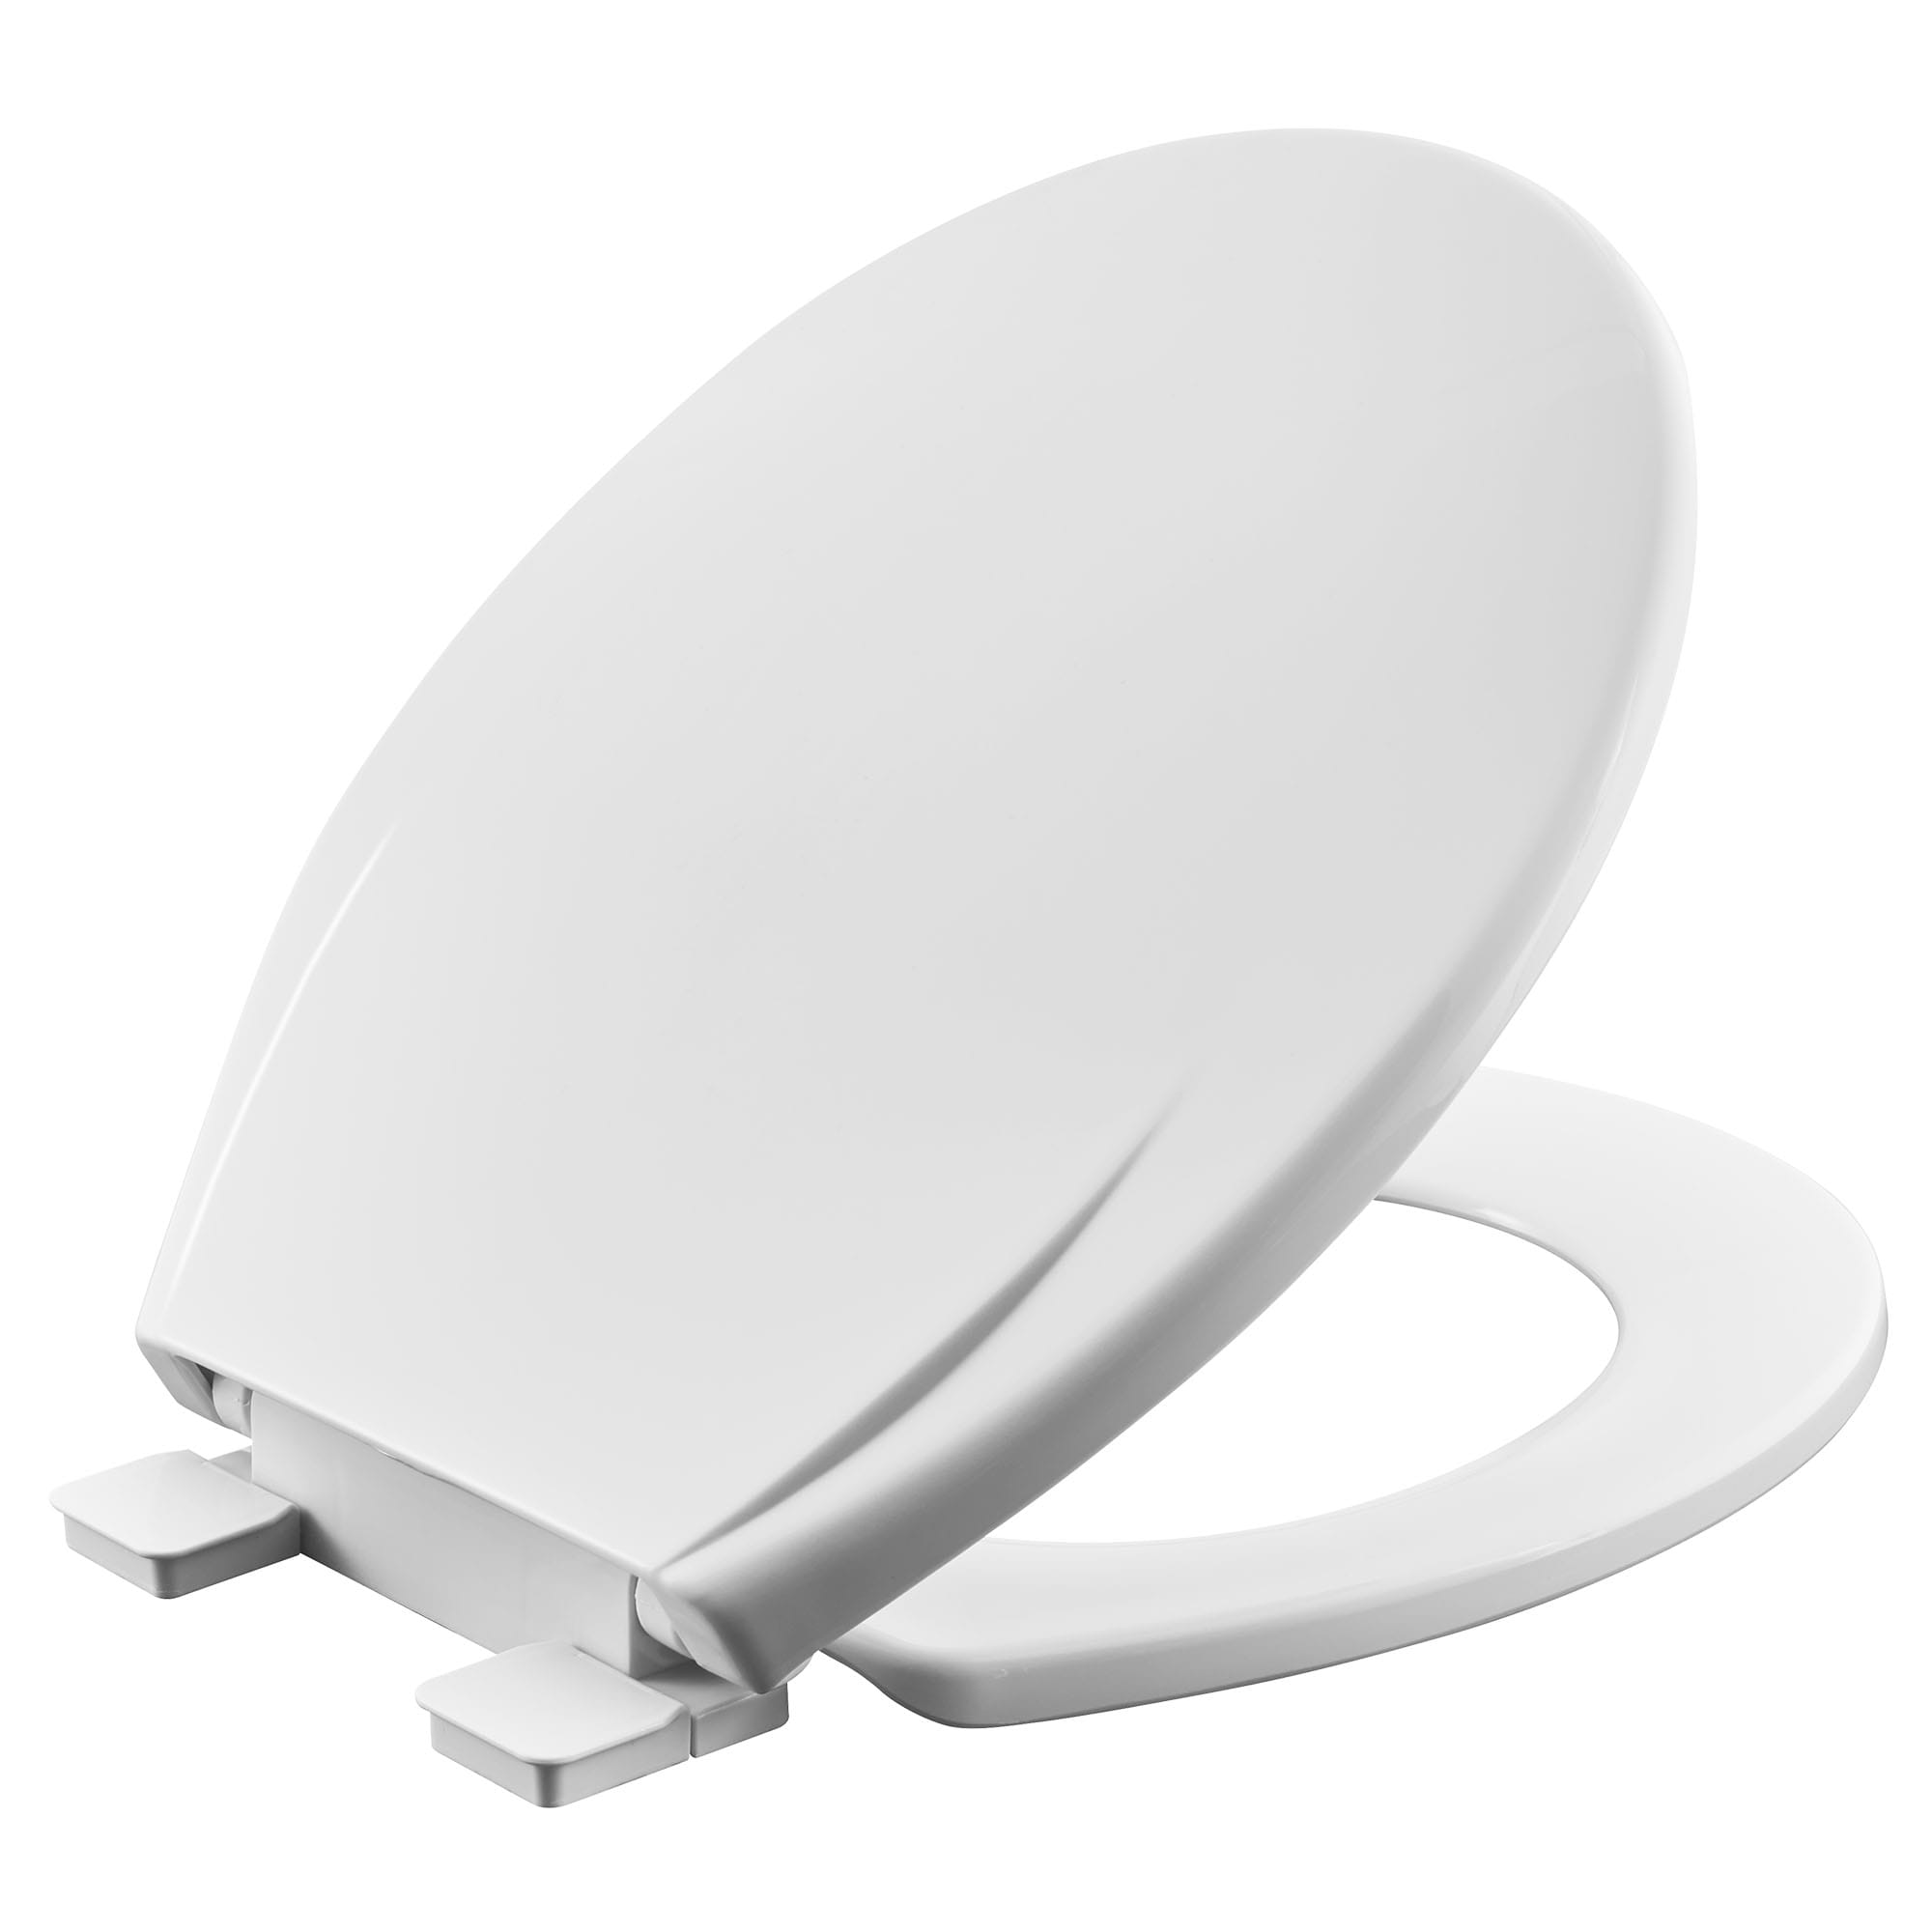 MightyTuff Slow-Close & Easy Lift-Off Round Front Toilet Seat